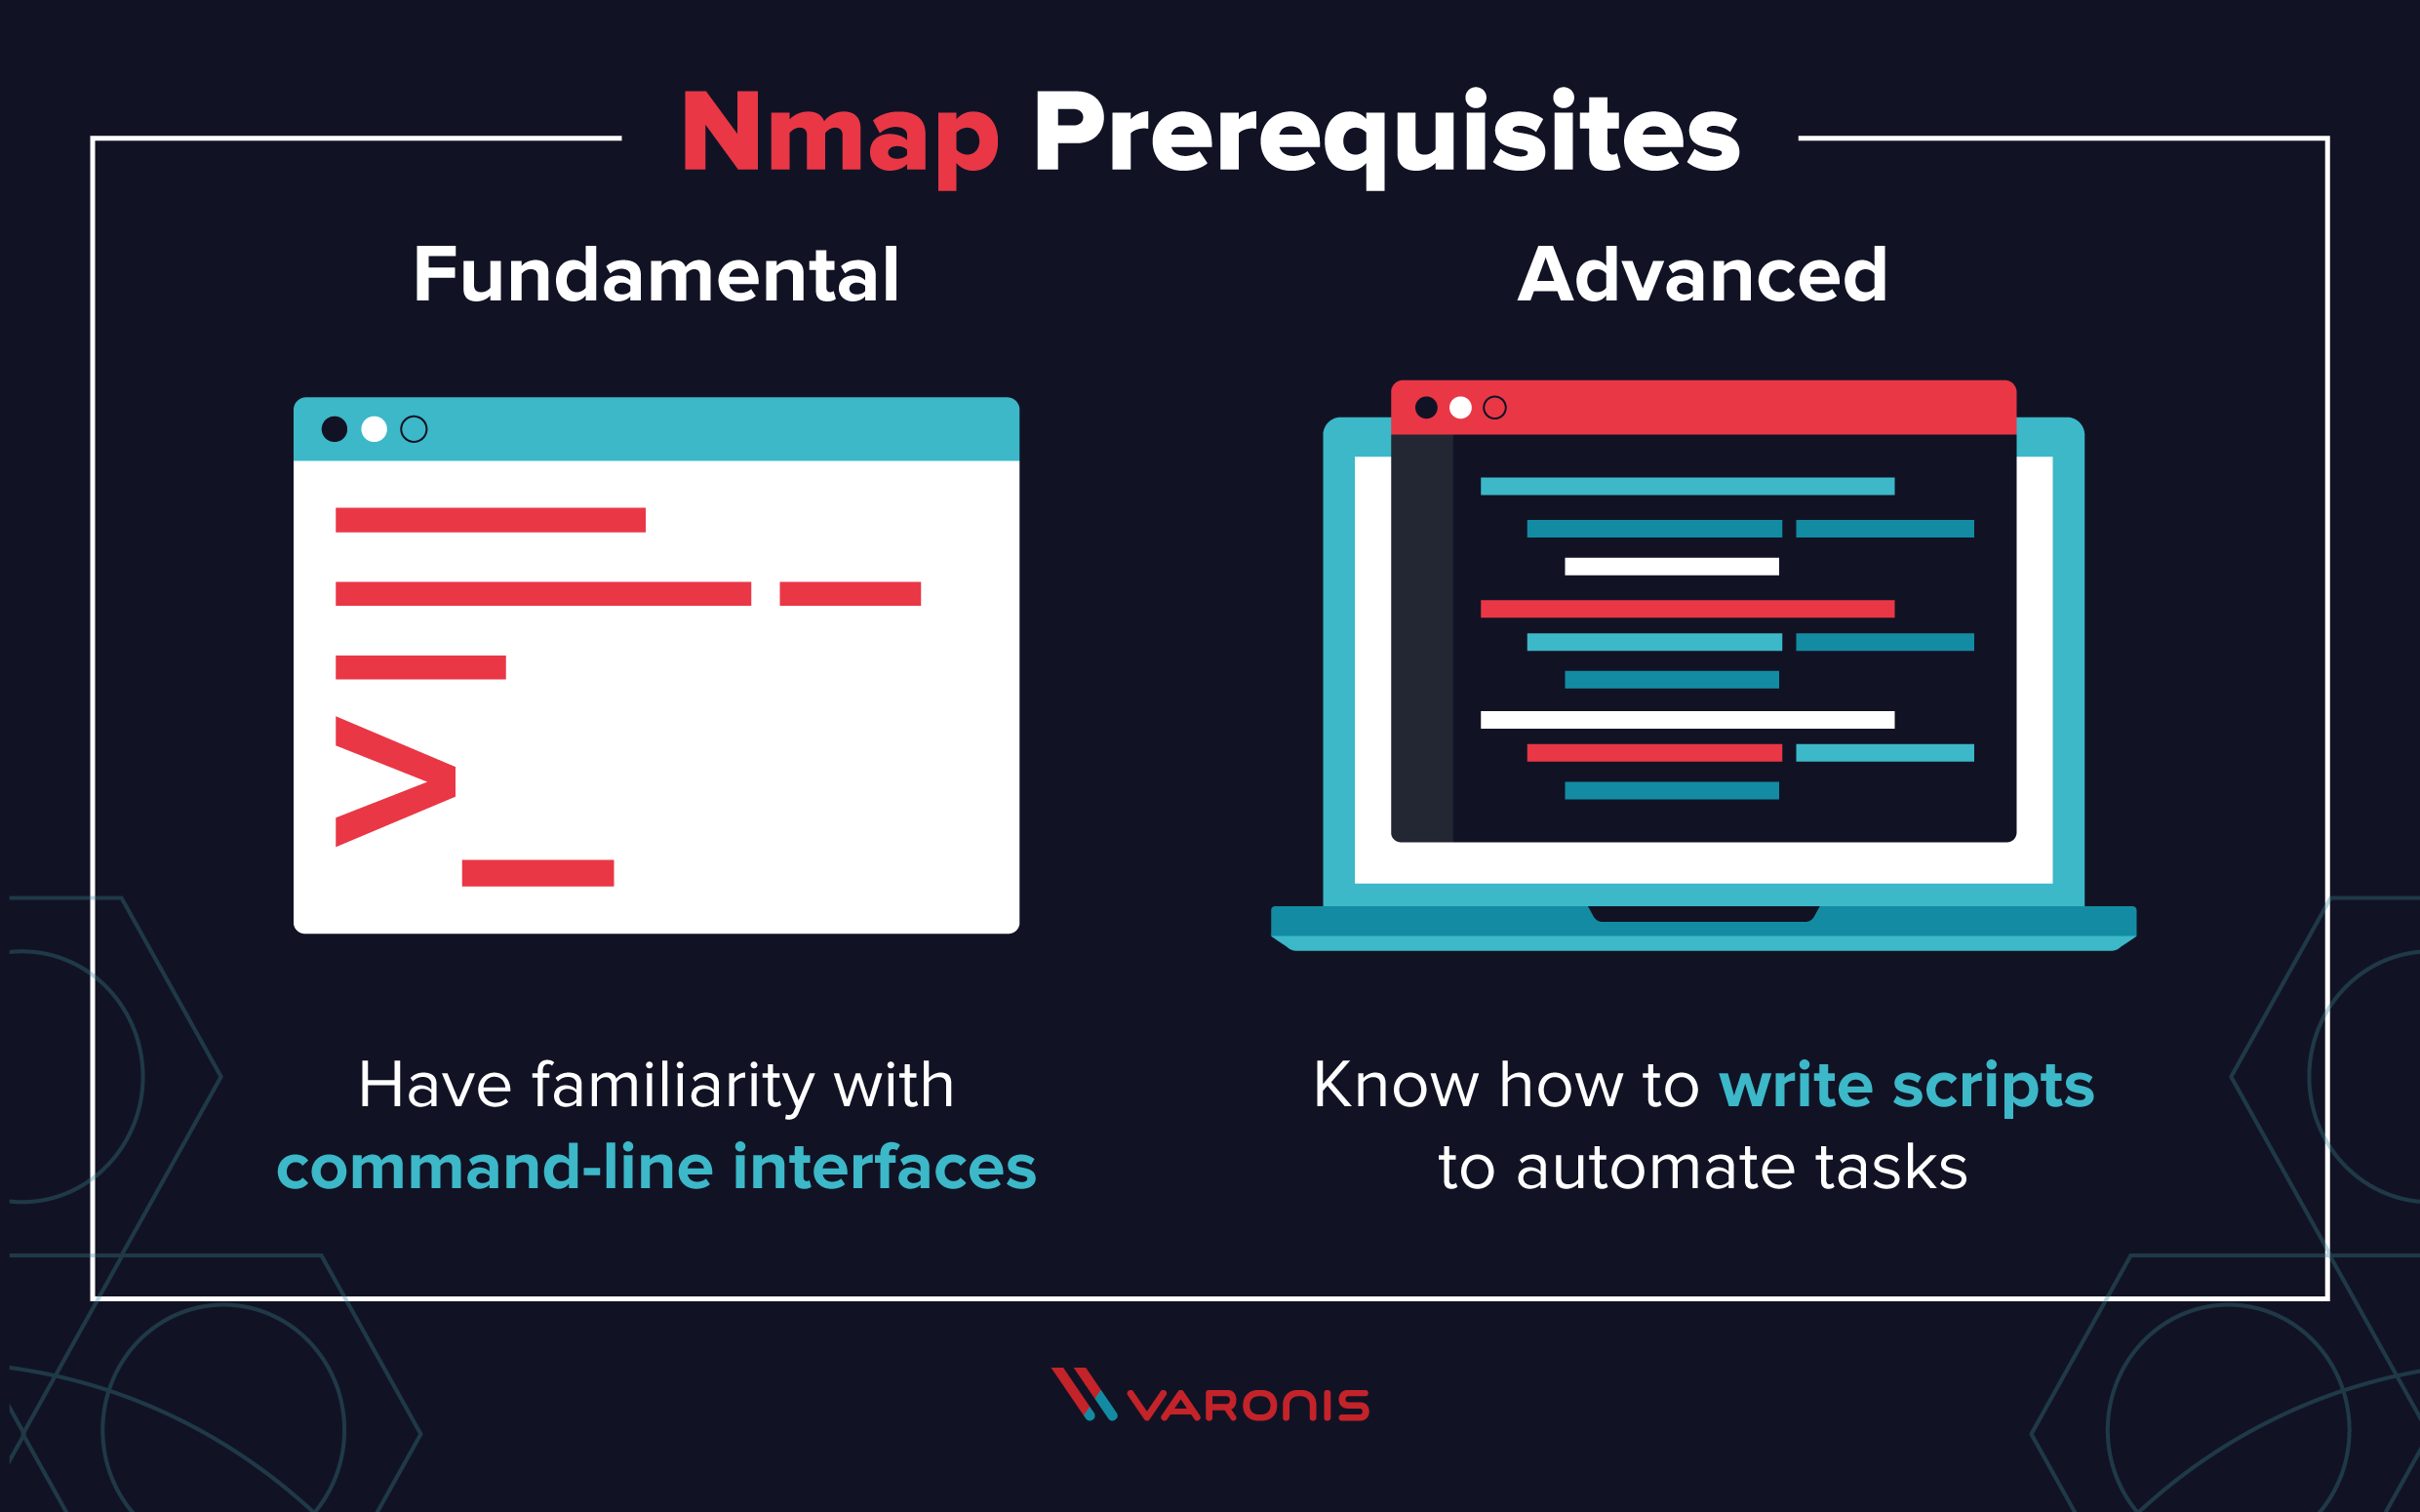 The prerequisites of using Nmap